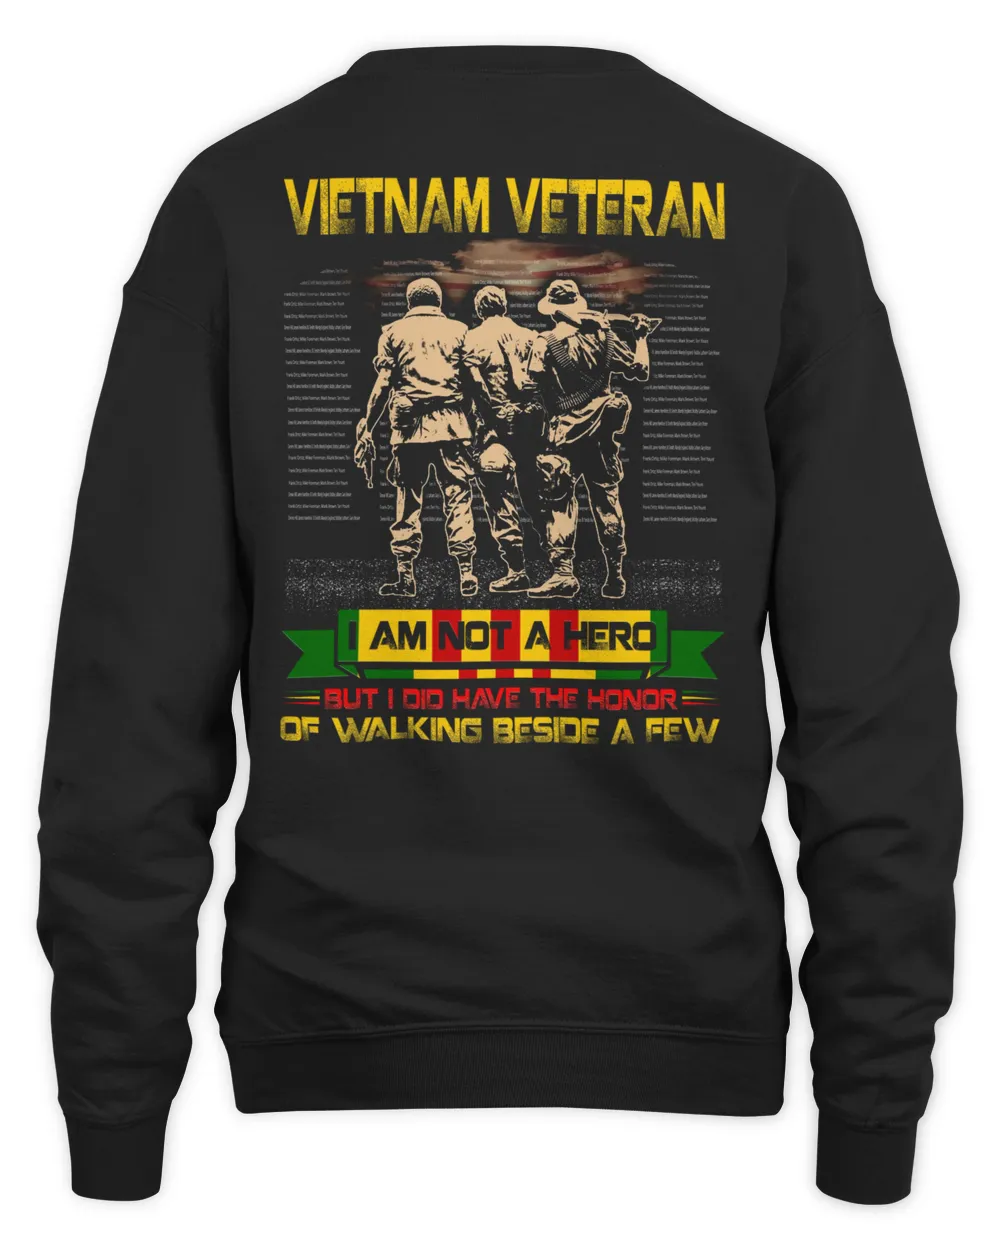 VIETNAM VETERAN I AM NOT A HERO BUT I DID HAVE THE HONOR OF WALKING BESIDE A FEW